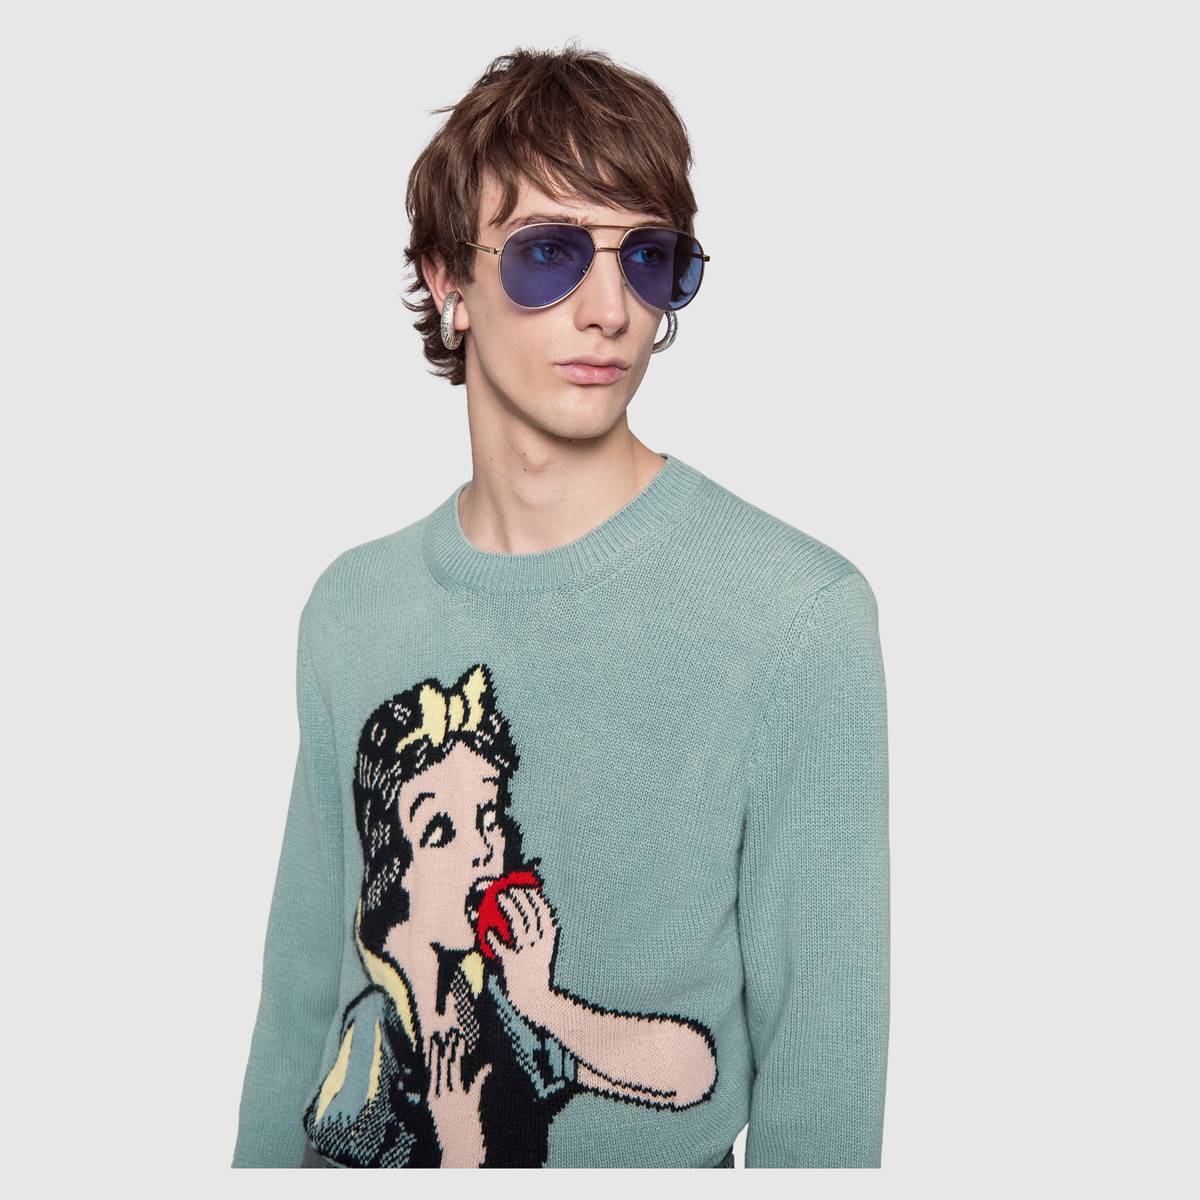 Shop the Snow White sweater from Gucci 